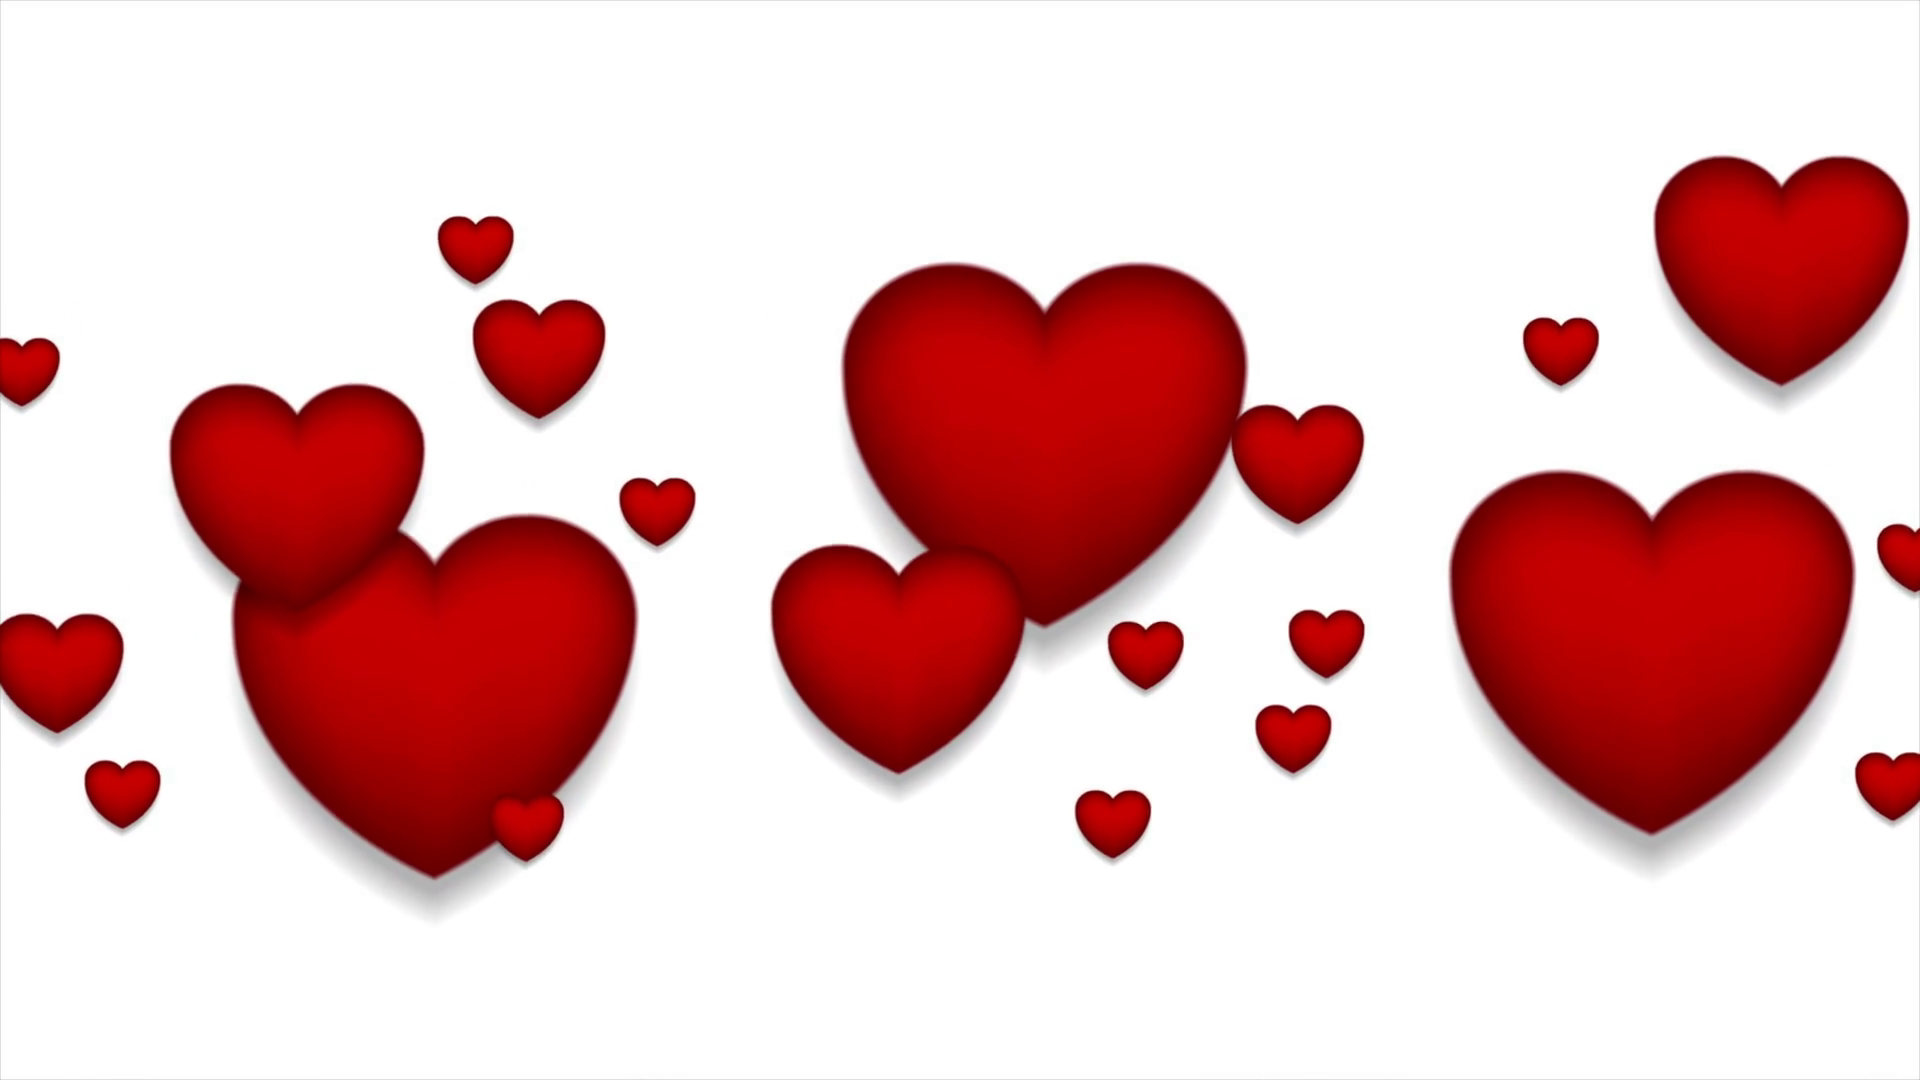 Animated Valentines Day PNG Transparent Animated Valentines Day.PNG Images. | PlusPNG